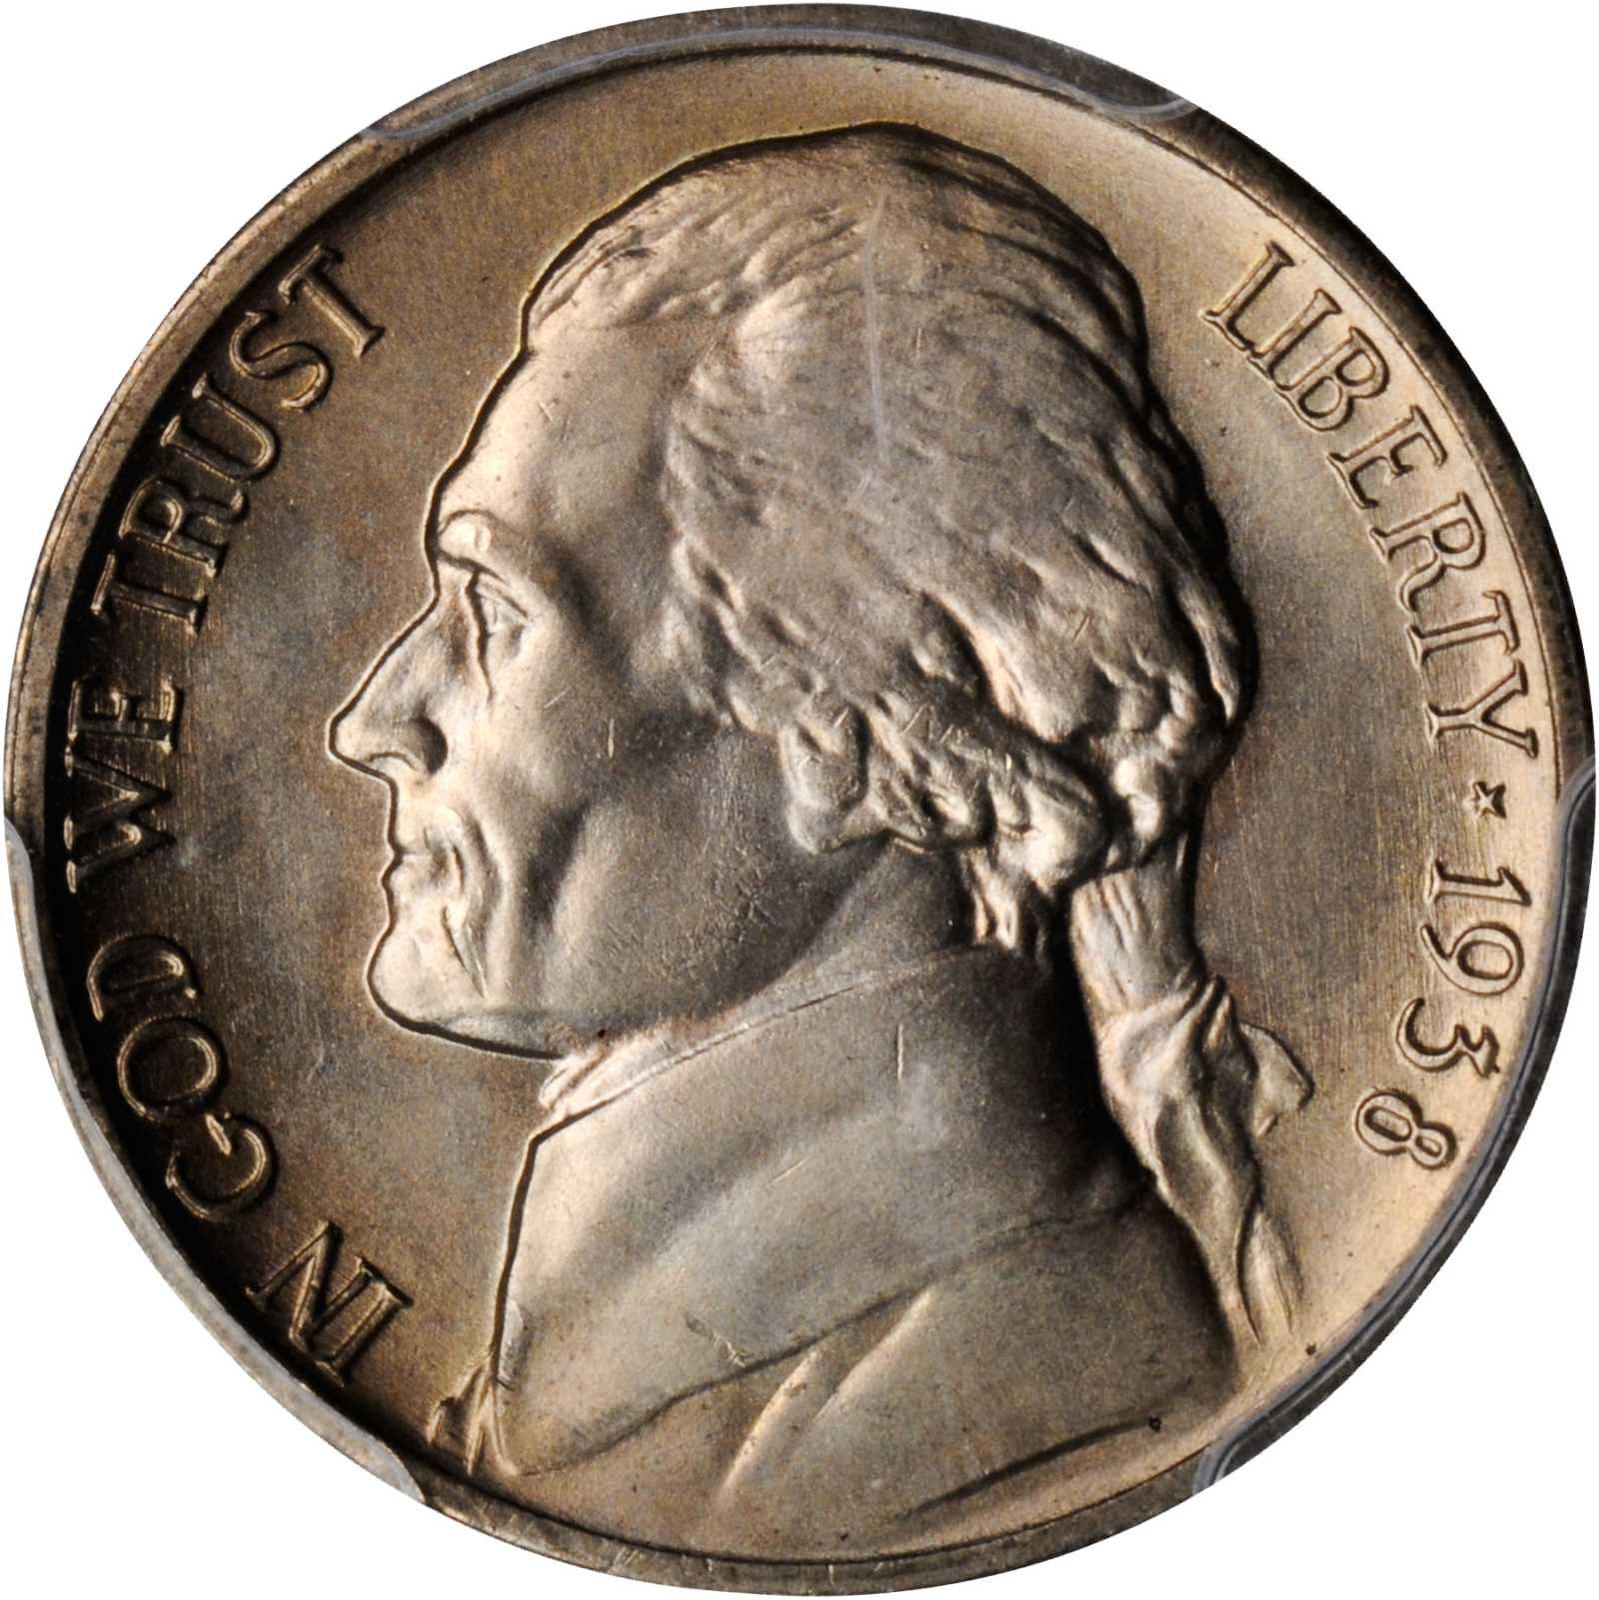 who is on the nickel coin